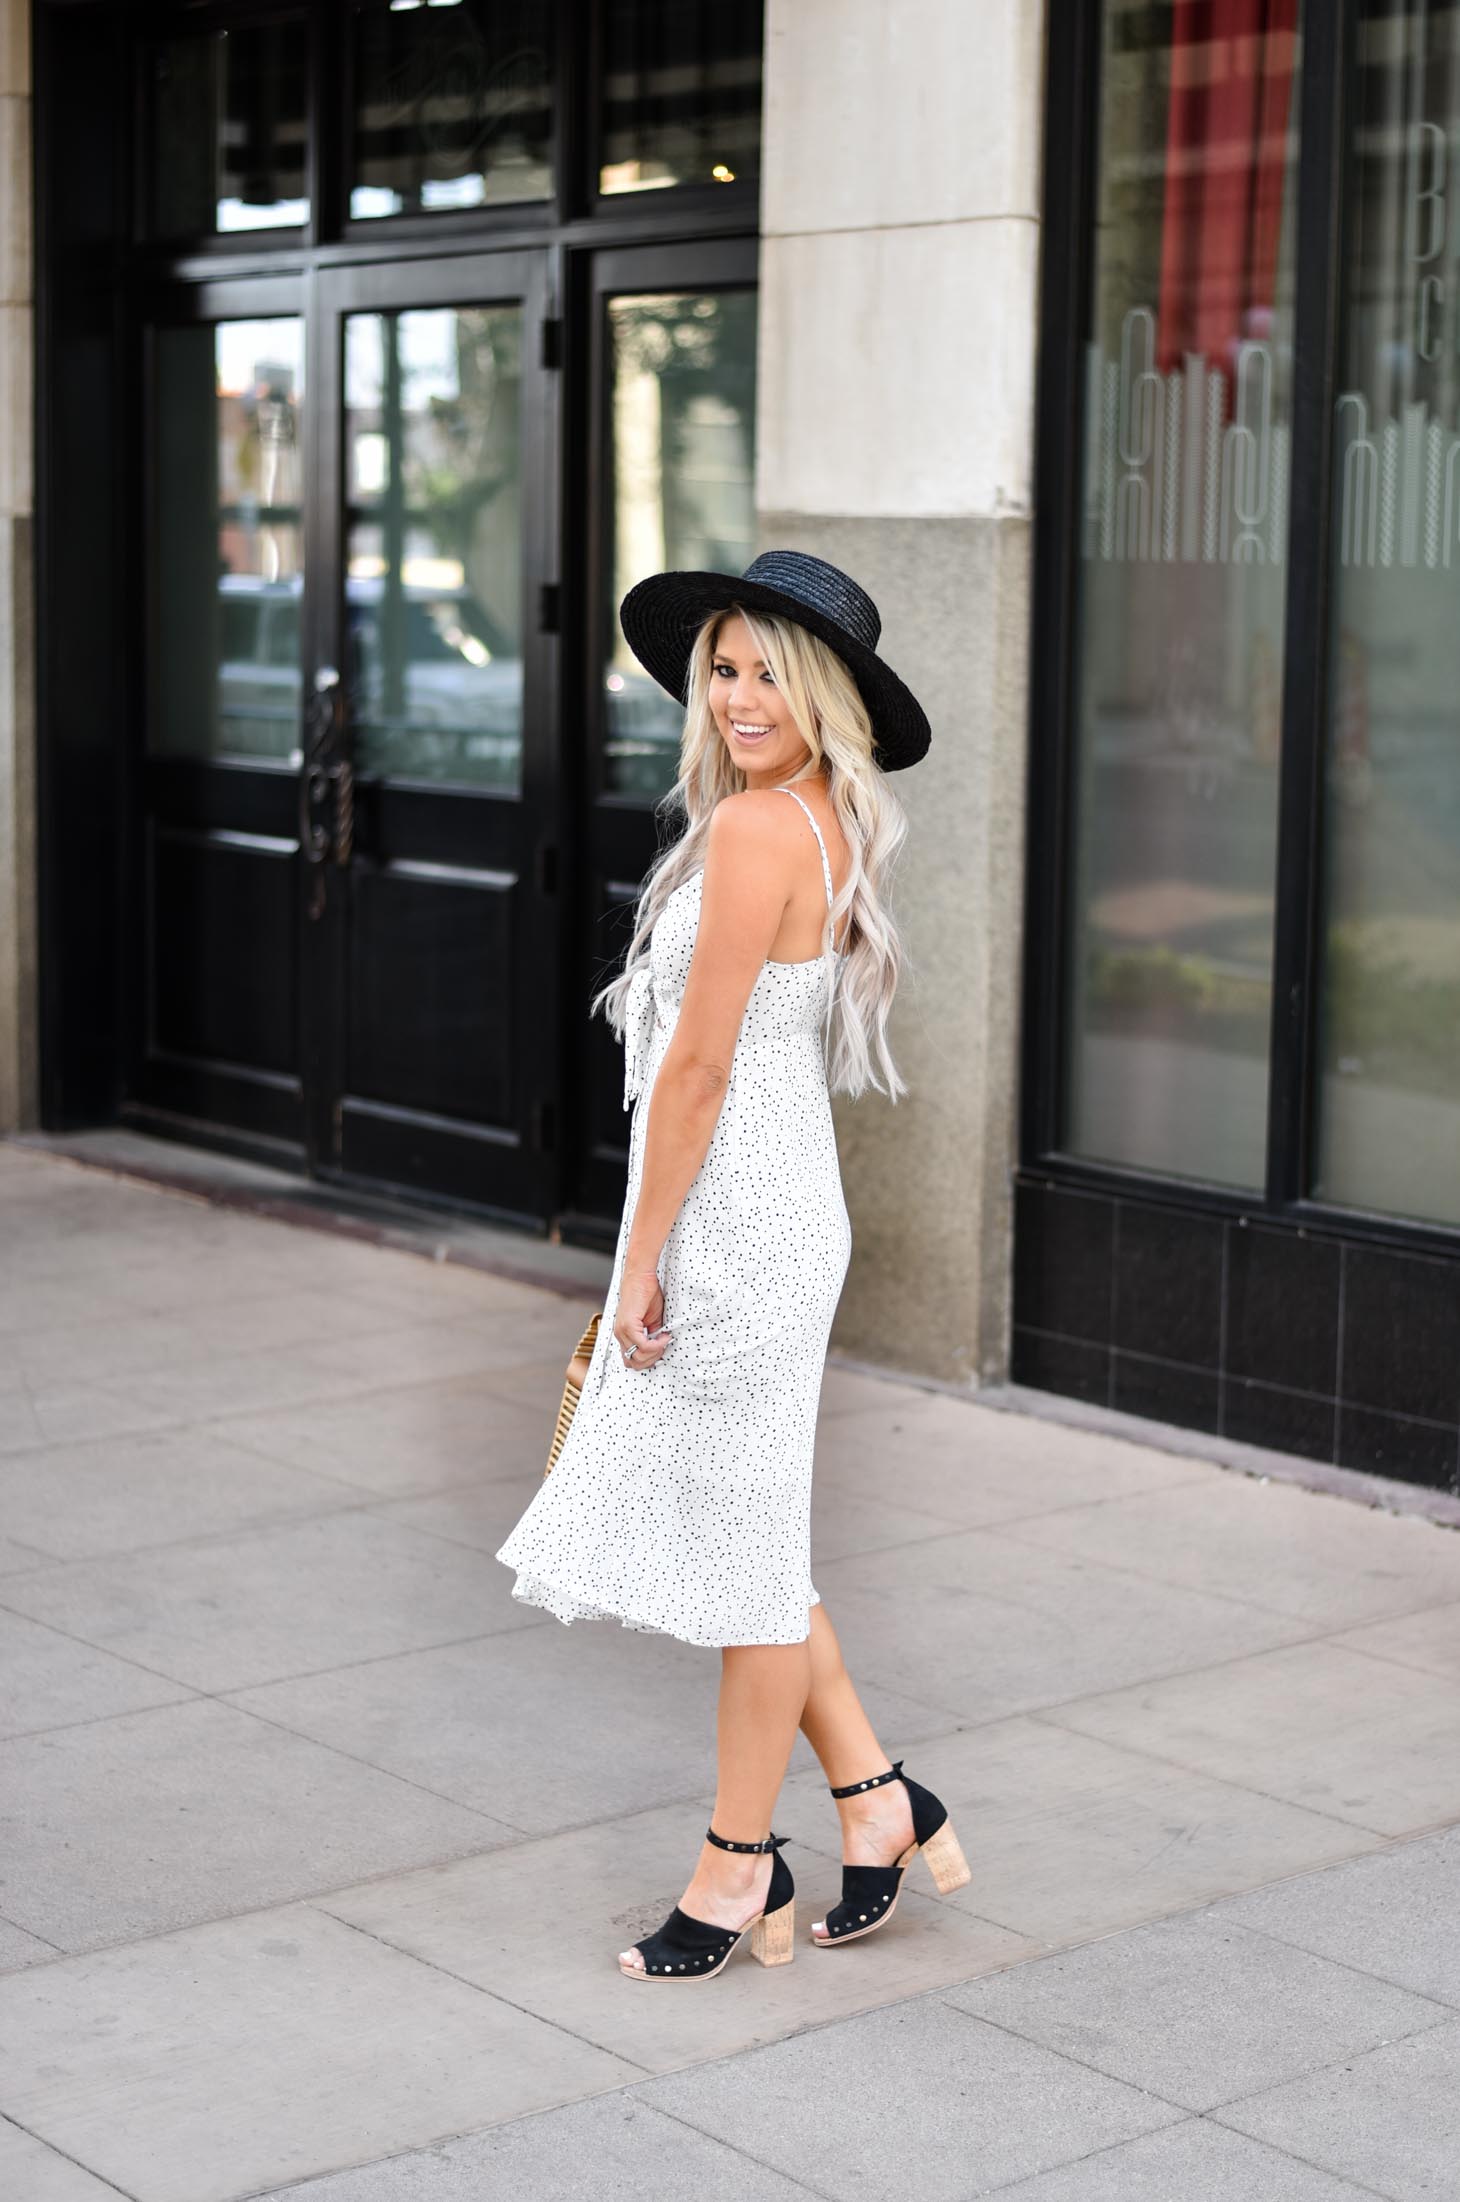 Erin Elizabeth of Wink and a Twirl shares the sweetest polka dot dress from Shop Entourage in Downtown Phoenix